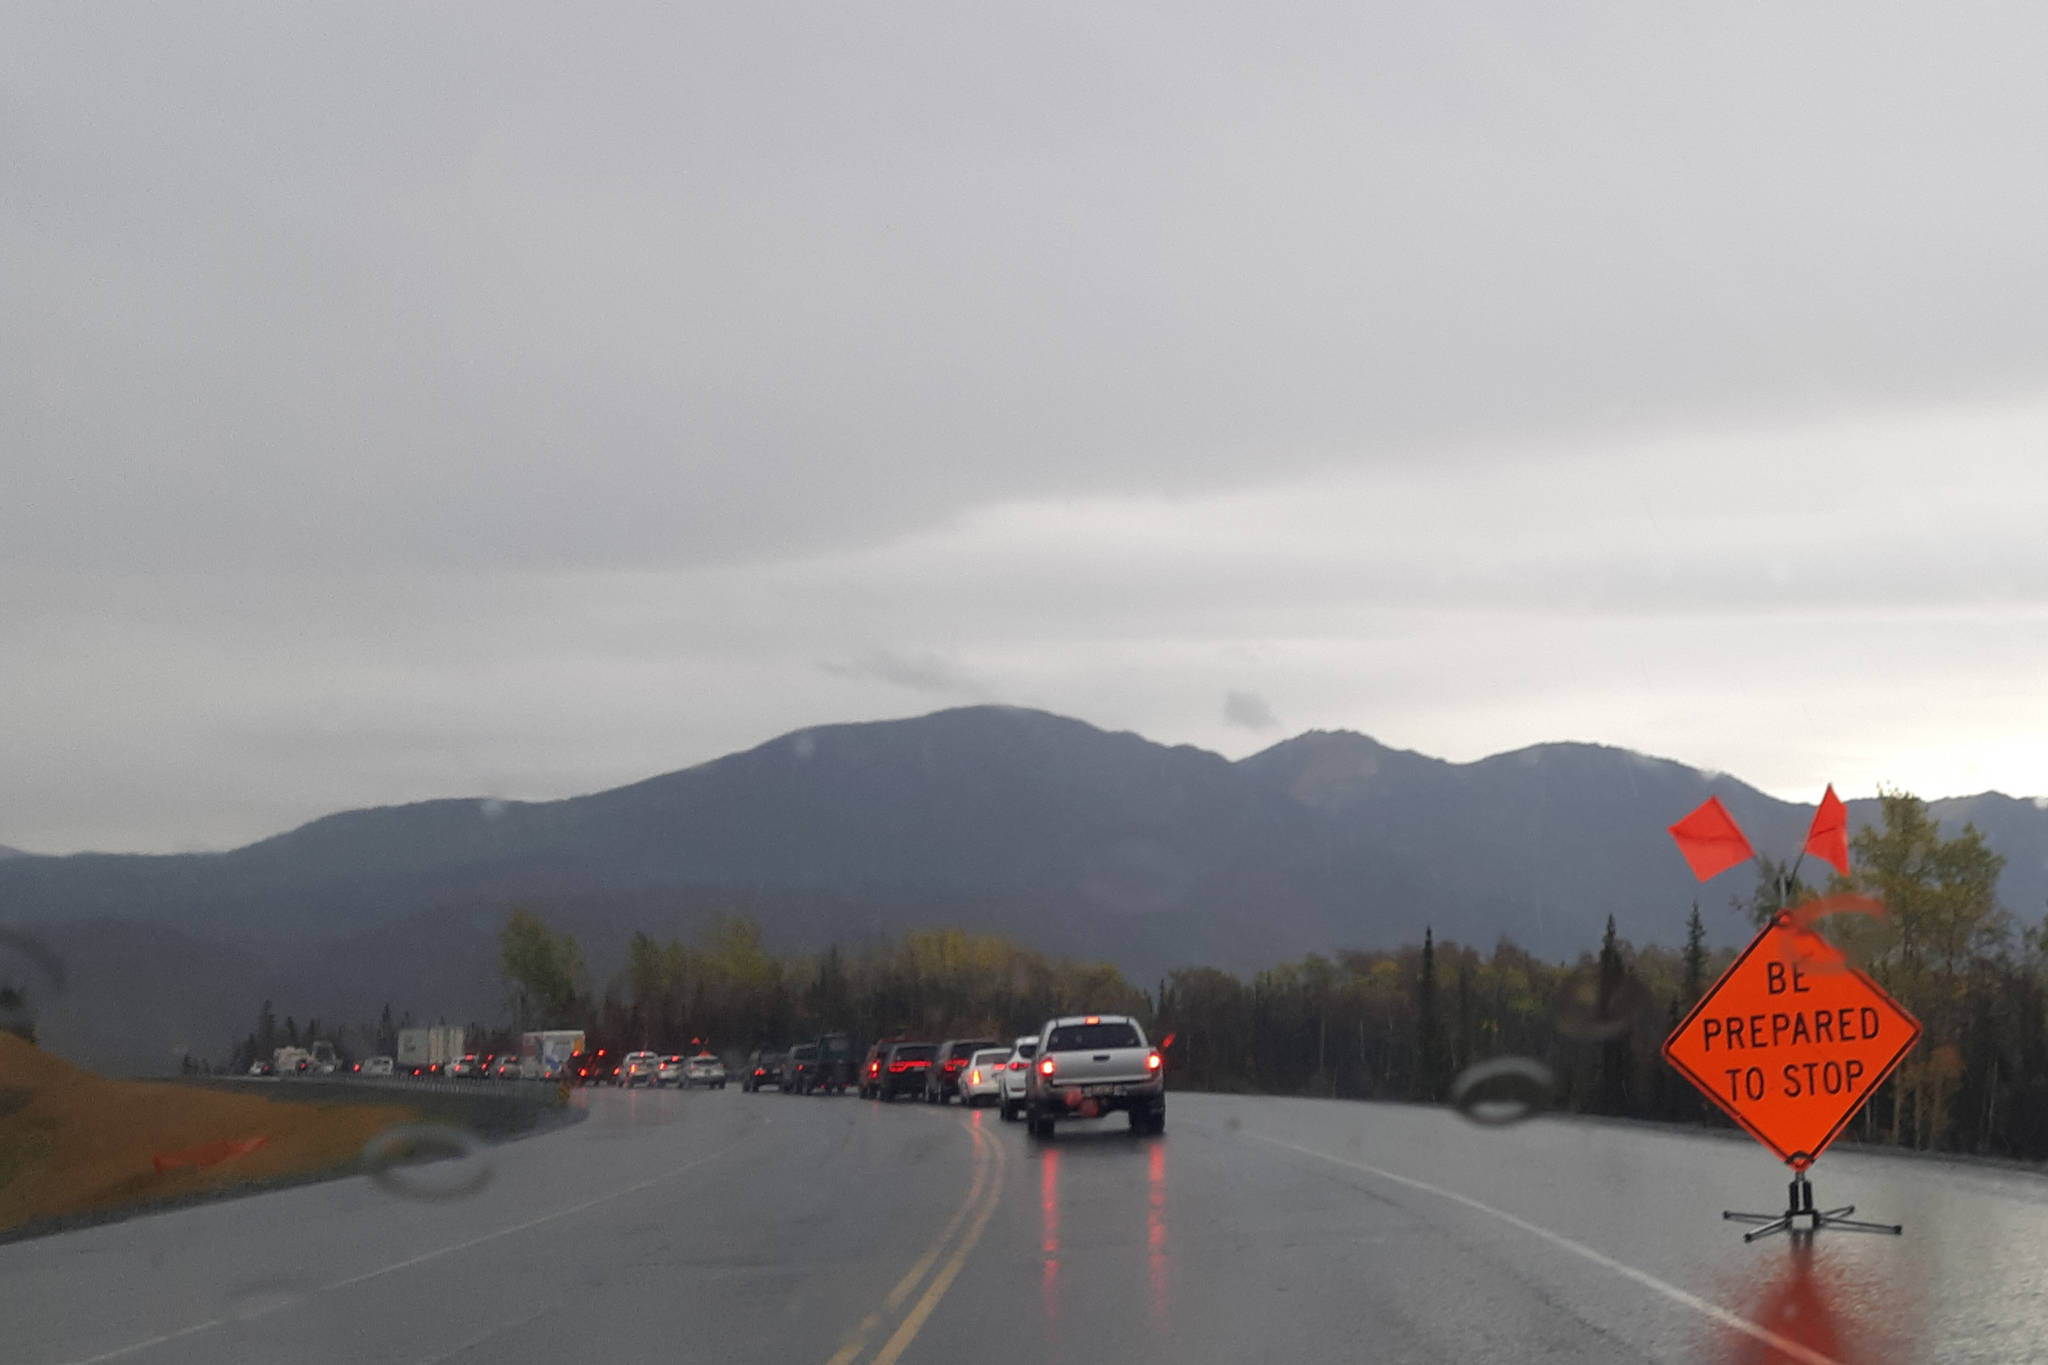 Cars can be seen lined up on the Sterling Highway, Alaska, on Saturday, Sept. 7, 2019. (Photo by Brian Mazurek/Peninsula Clarion)